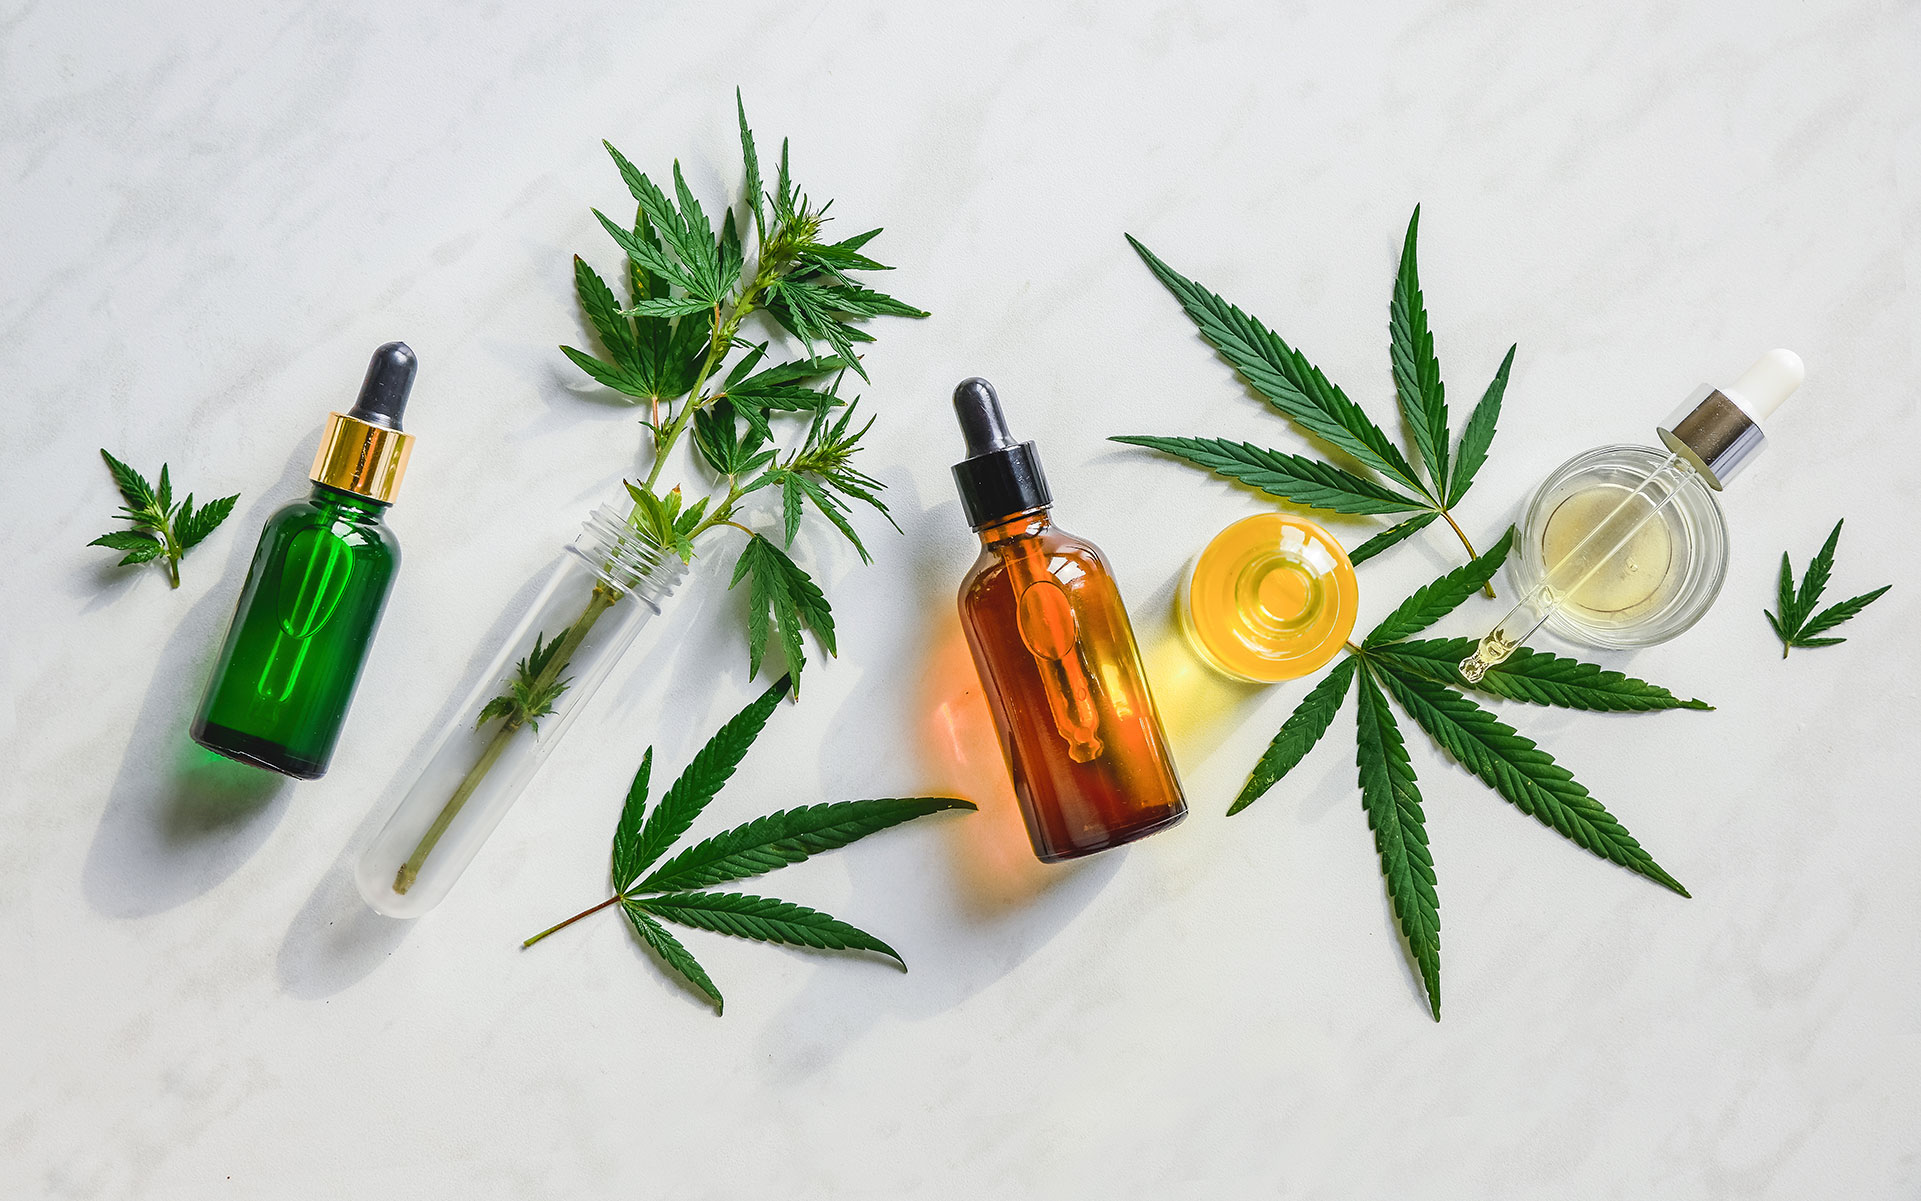 BEGINNERS GUIDE: THE BEST WAY TO TAKE CBD